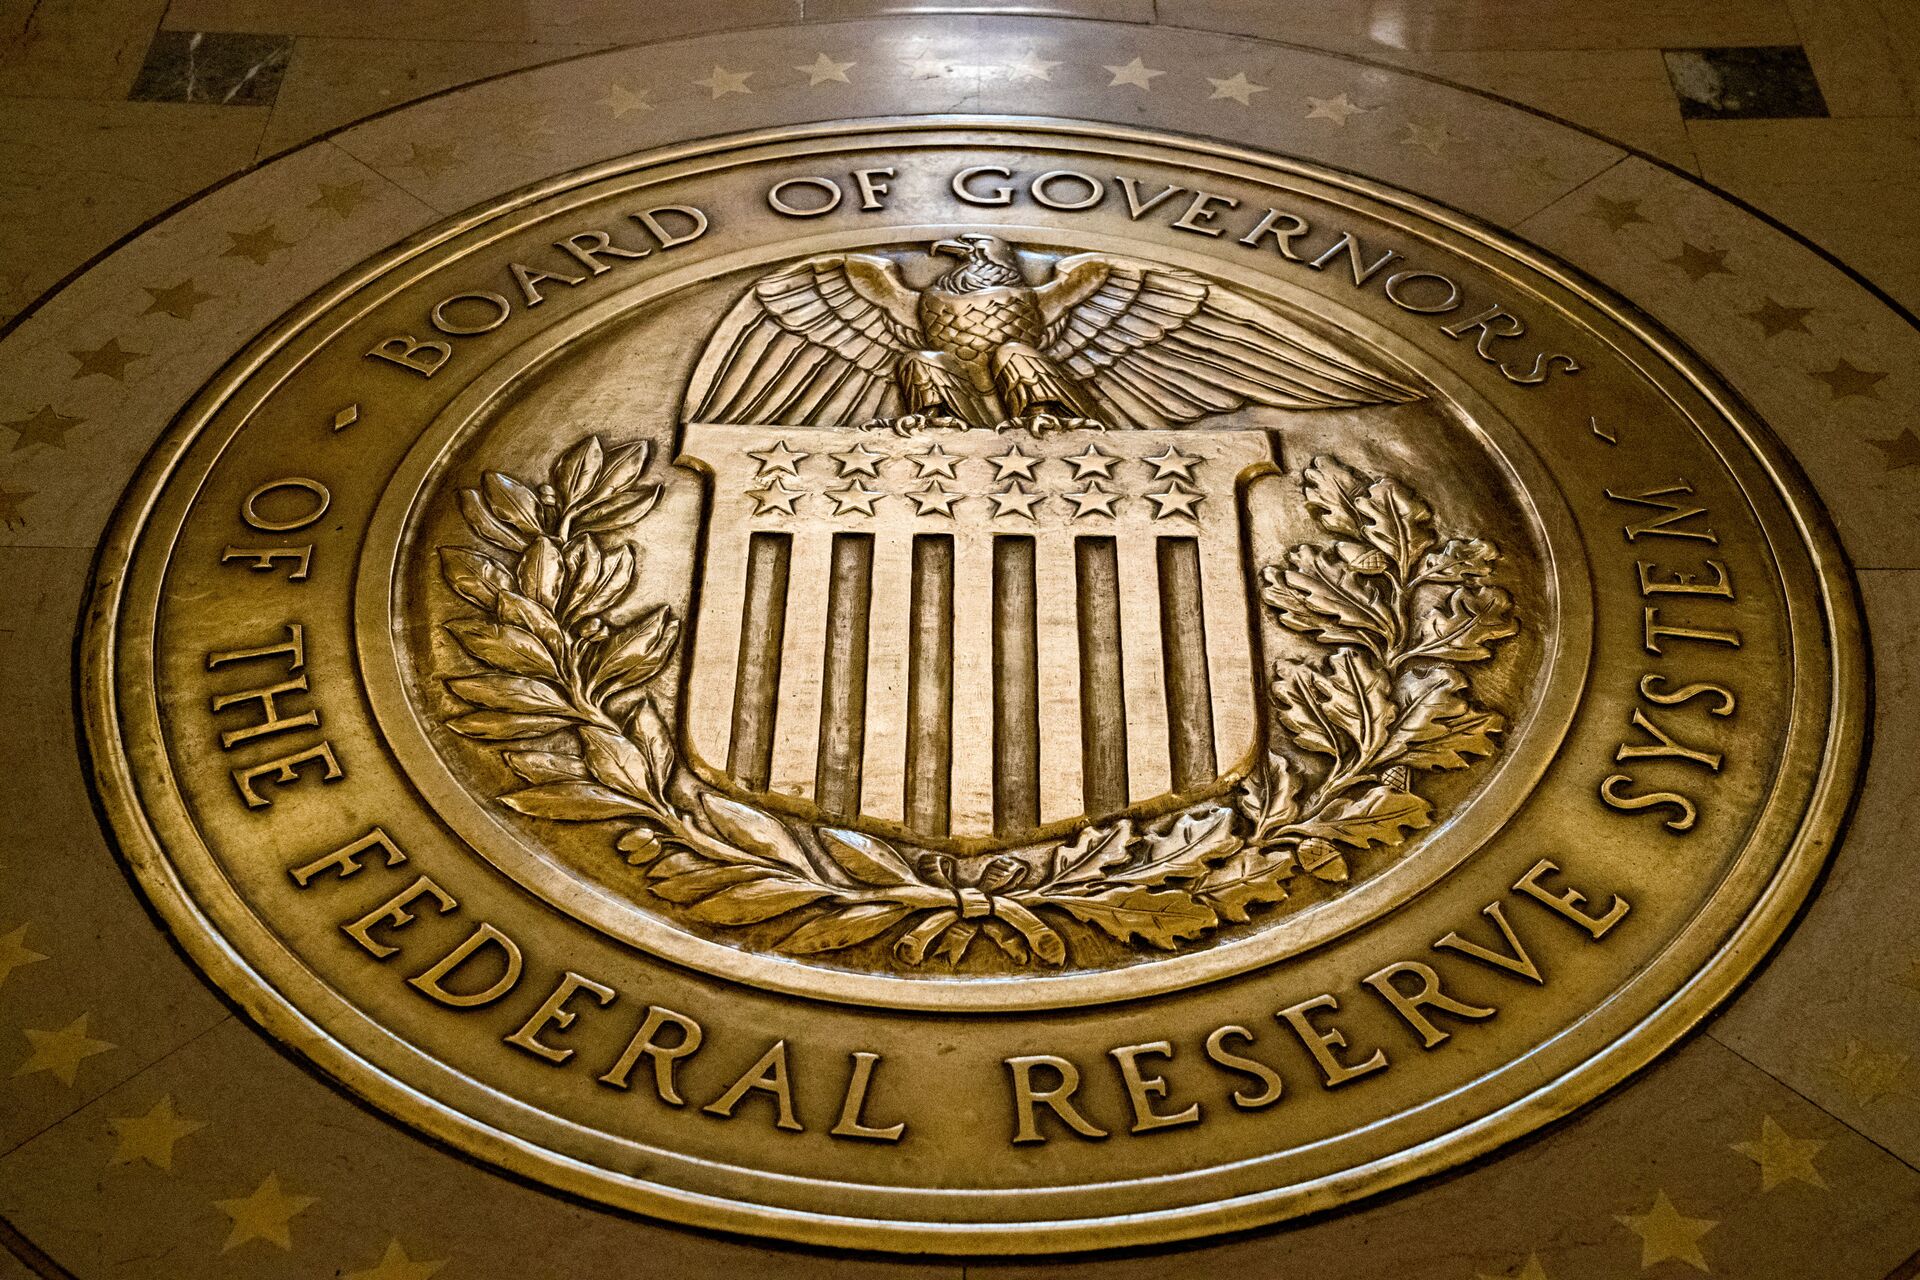 FILE- In this Feb. 5, 2018, file photo, the seal of the Board of Governors of the United States Federal Reserve System is displayed in the ground at the Marriner S. Eccles Federal Reserve Board Building in Washington. Richard Clarida, President Donald Trump's nominee for the No. 2 post at the Federal Reserve, pledged on Tuesday, May 15, to support the Fed's twin goals of stabilizing inflation and maximizing employment while also declaring the importance of the central bank’s independence.  - Sputnik International, 1920, 17.09.2021